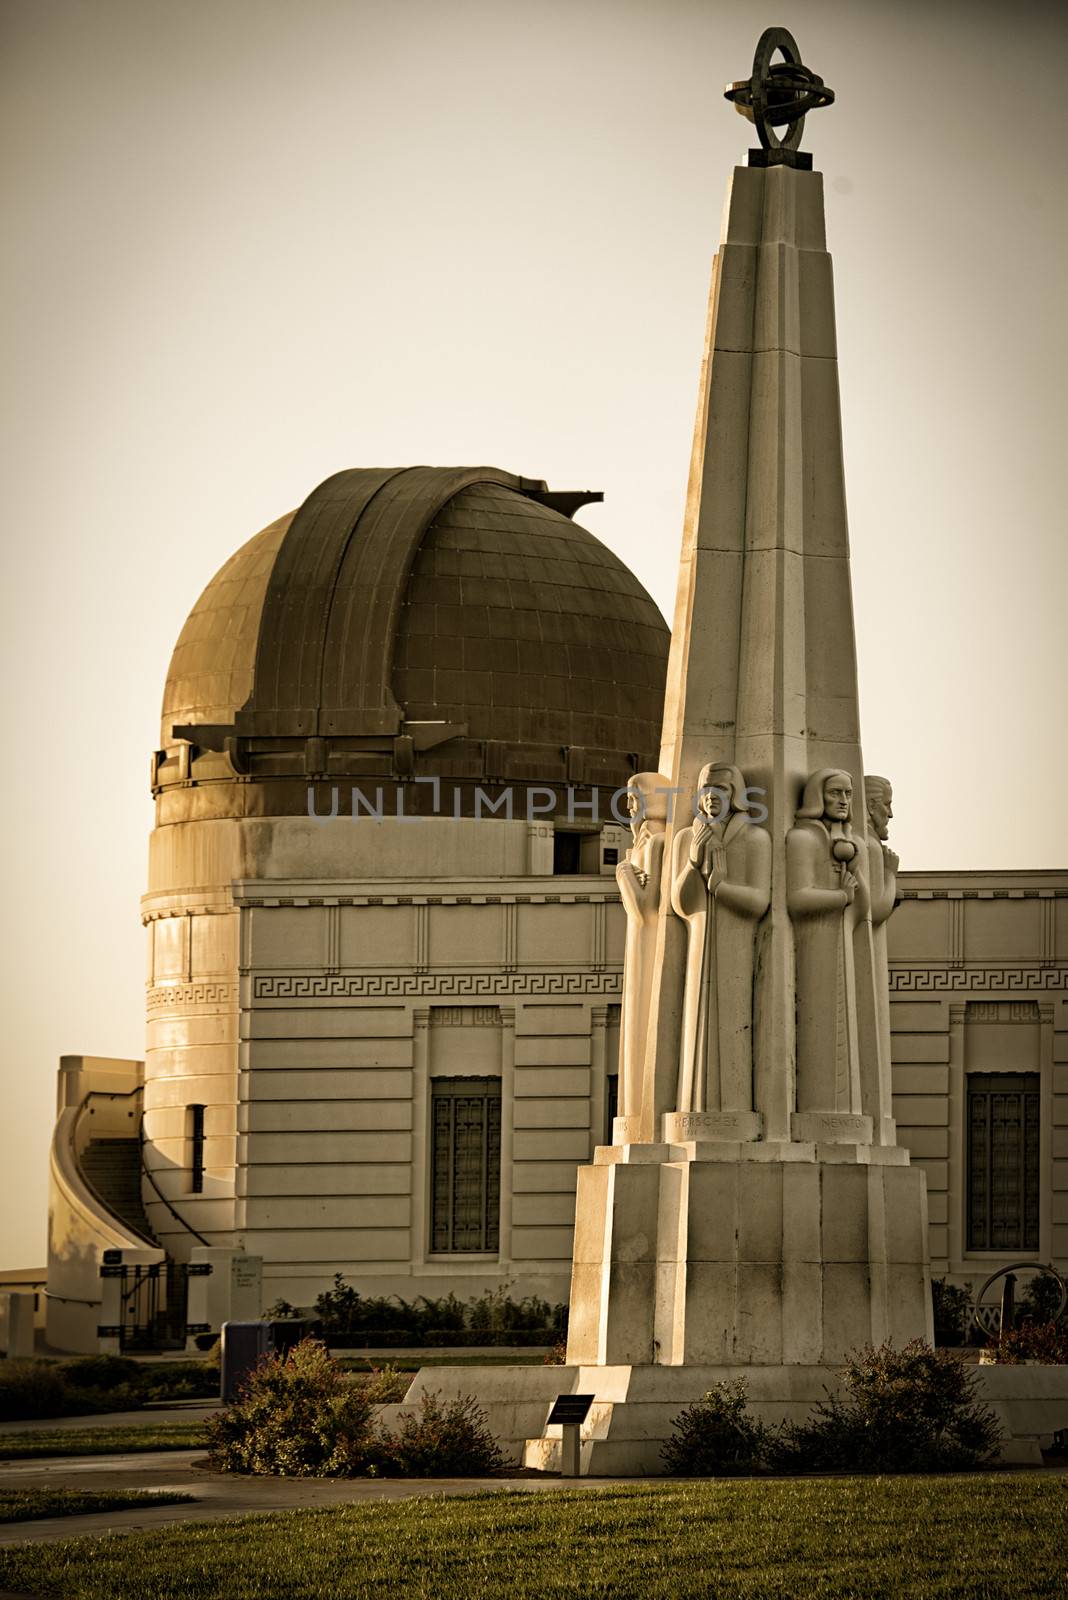 Astronomers Monument in front of Griffith Observatory in Griffith Park, Los Angeles, California, USA